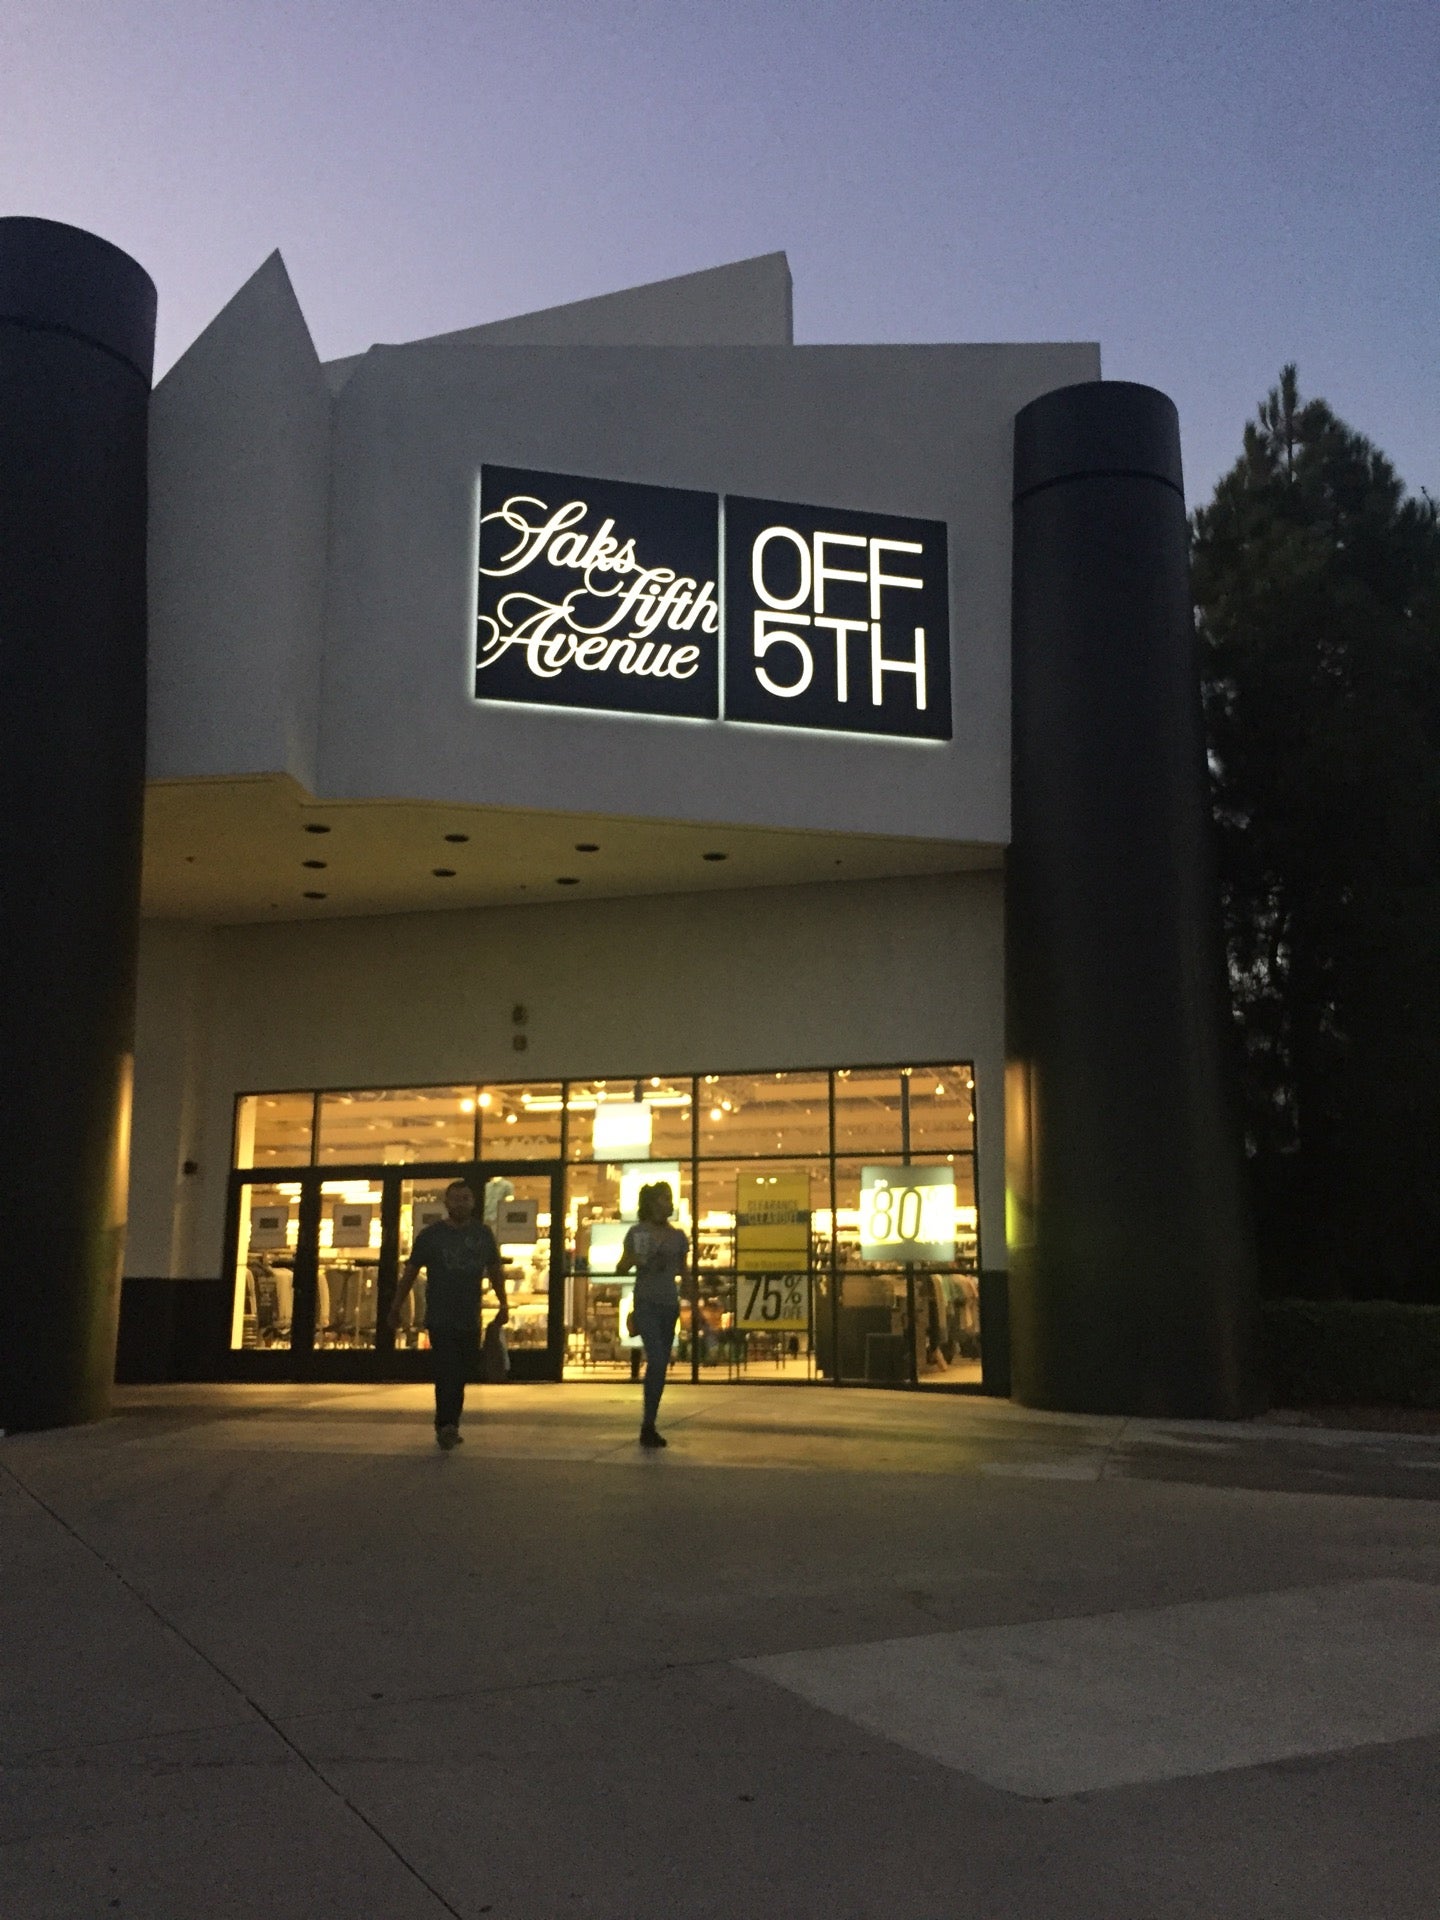 Saks Fifth Avenue OFF 5th- Vacaville, CA